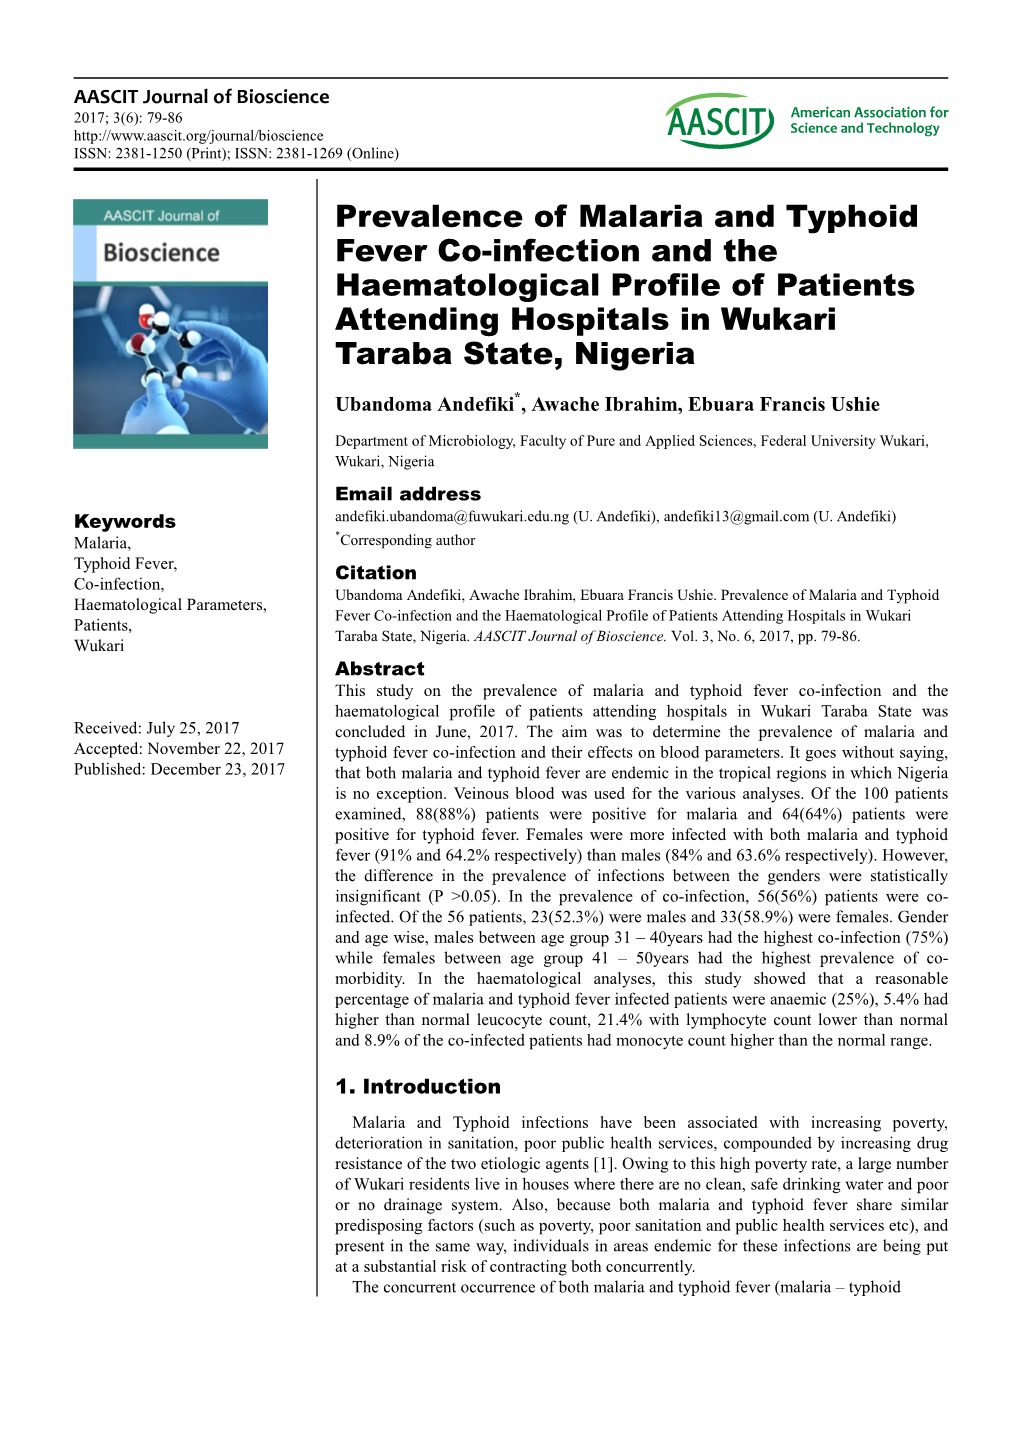 Prevalence of Malaria and Typhoid Fever Co-Infection and the Haematological Profile of Patients Attending Hospitals in Wukari Taraba State, Nigeria